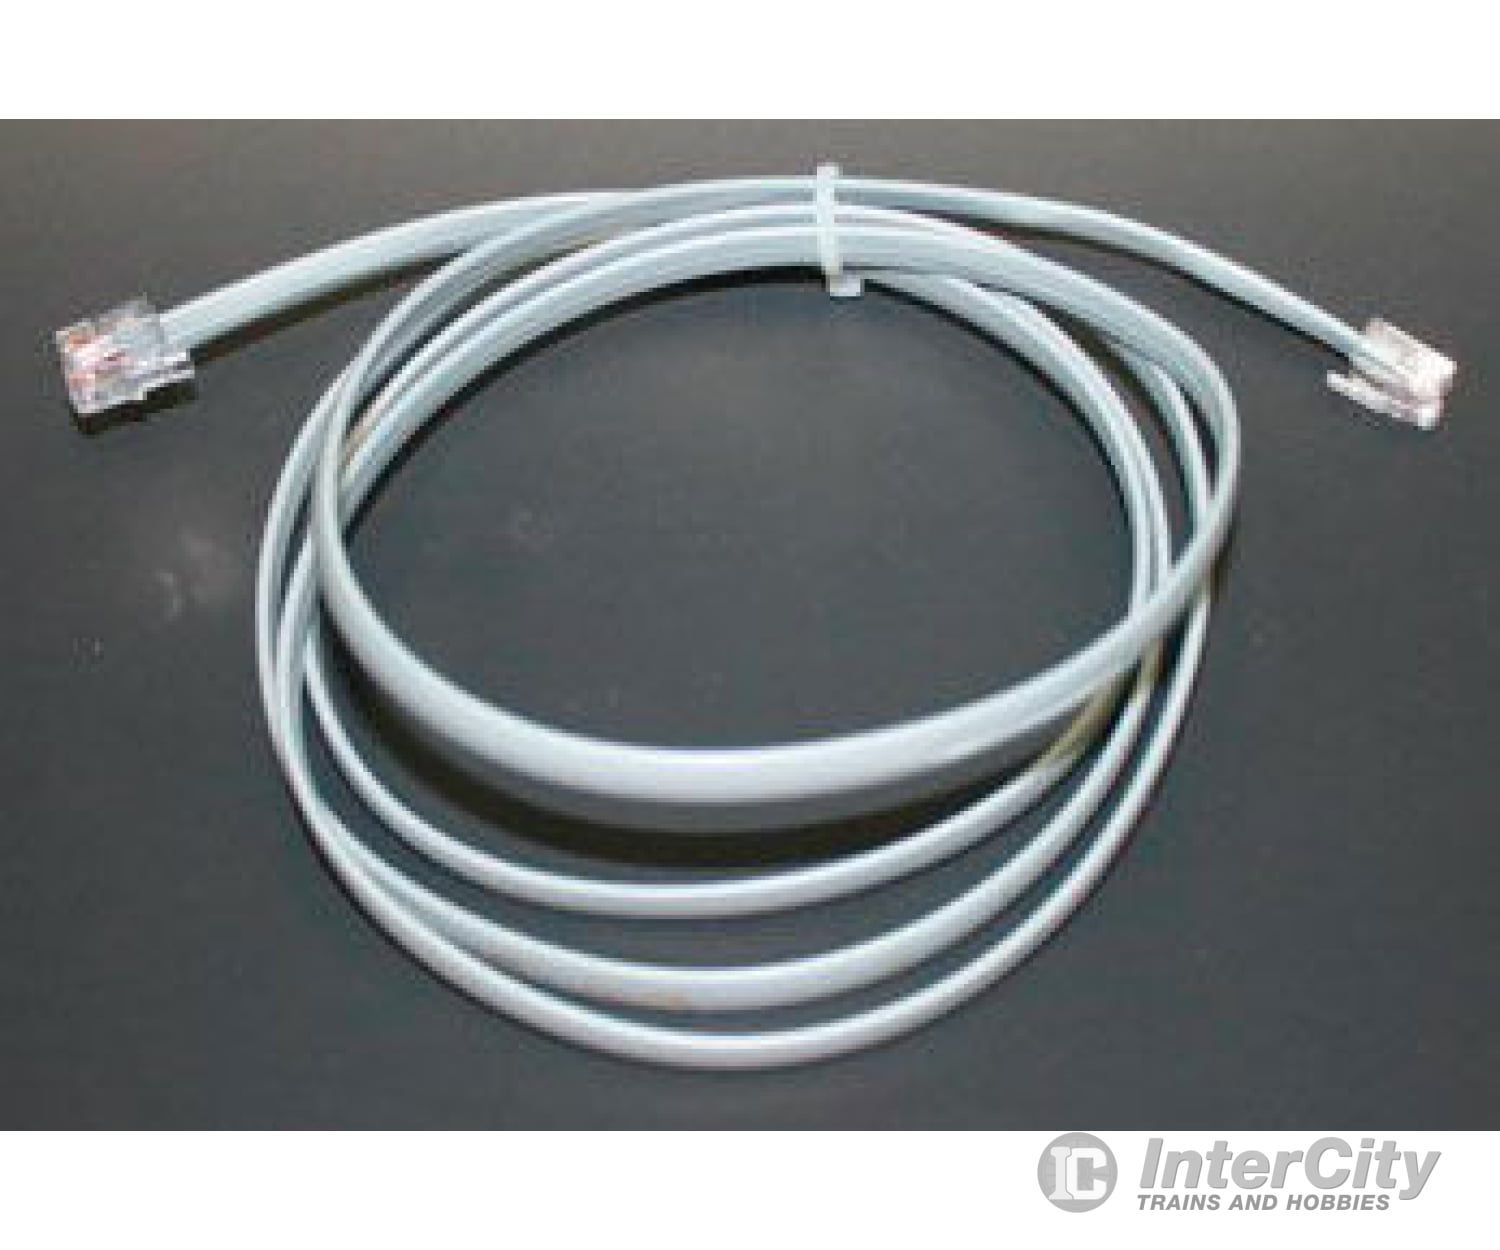 Accu Lites A 2010 Loconet/Nce Cable - - 10’ 3M Dcc Accessories